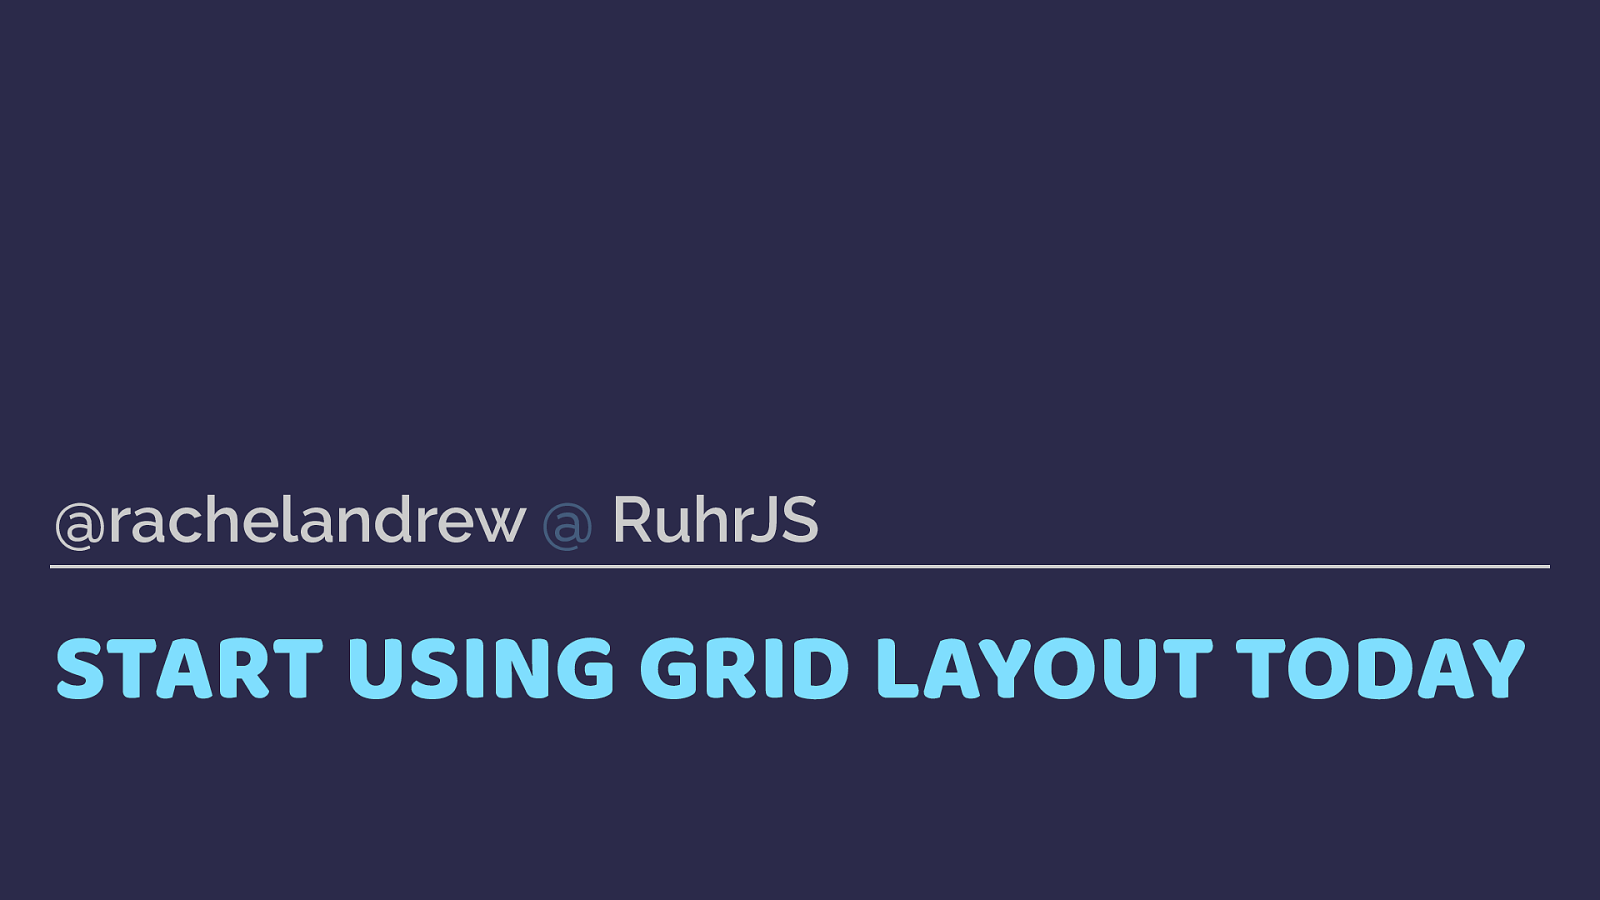 Start Using CSS Grid Layout Today